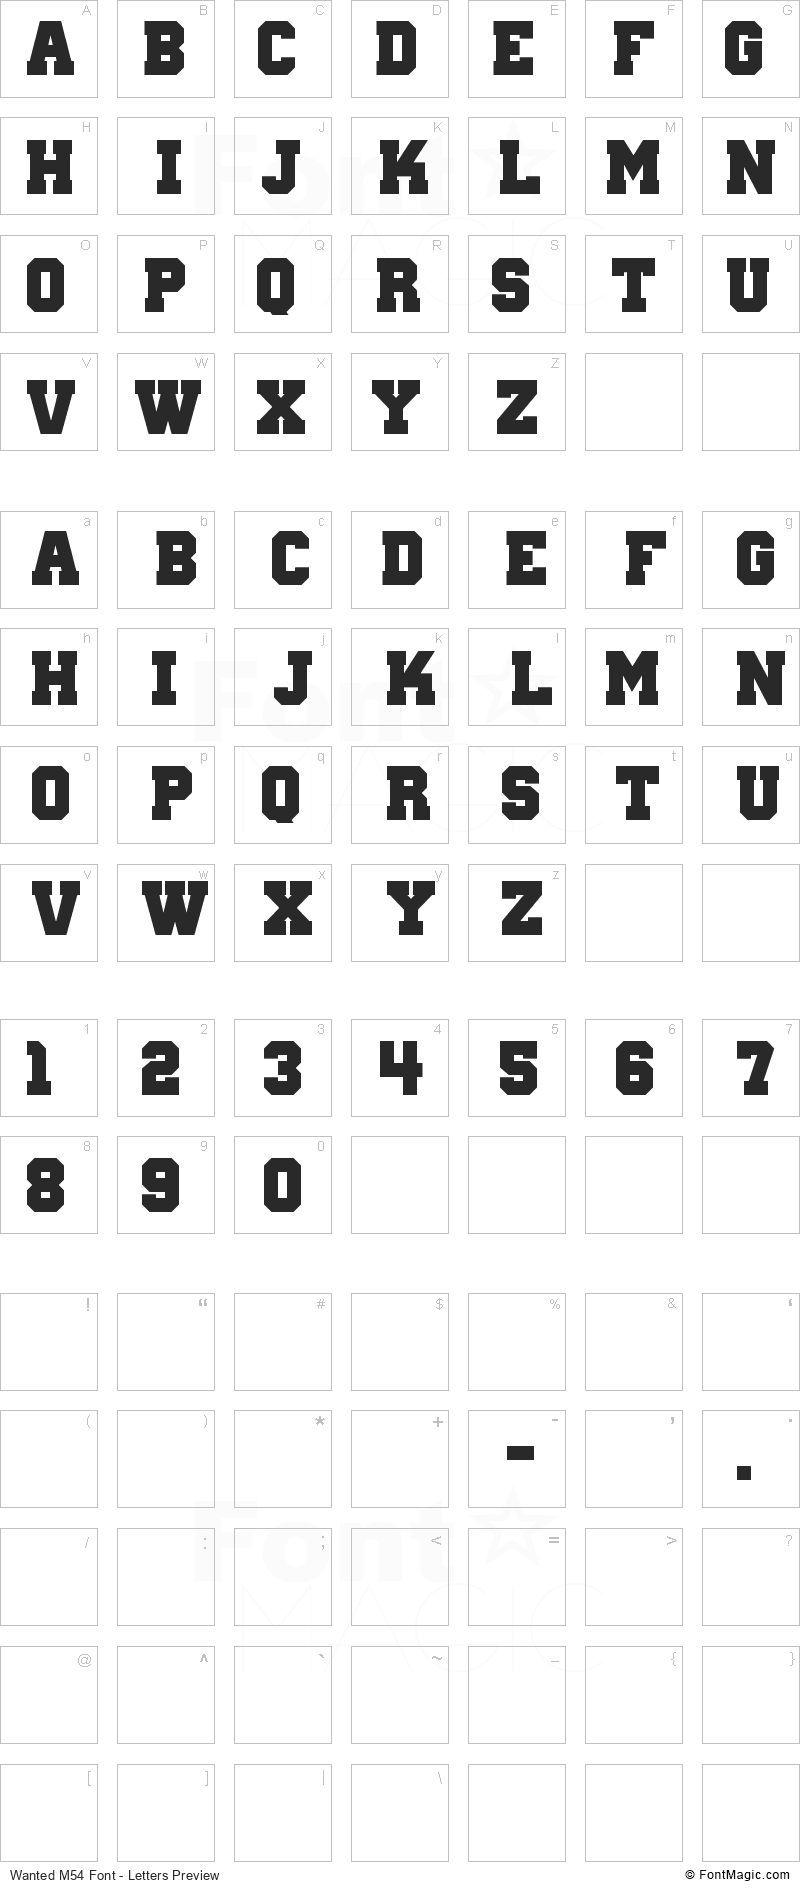 Wanted M54 Font - All Latters Preview Chart